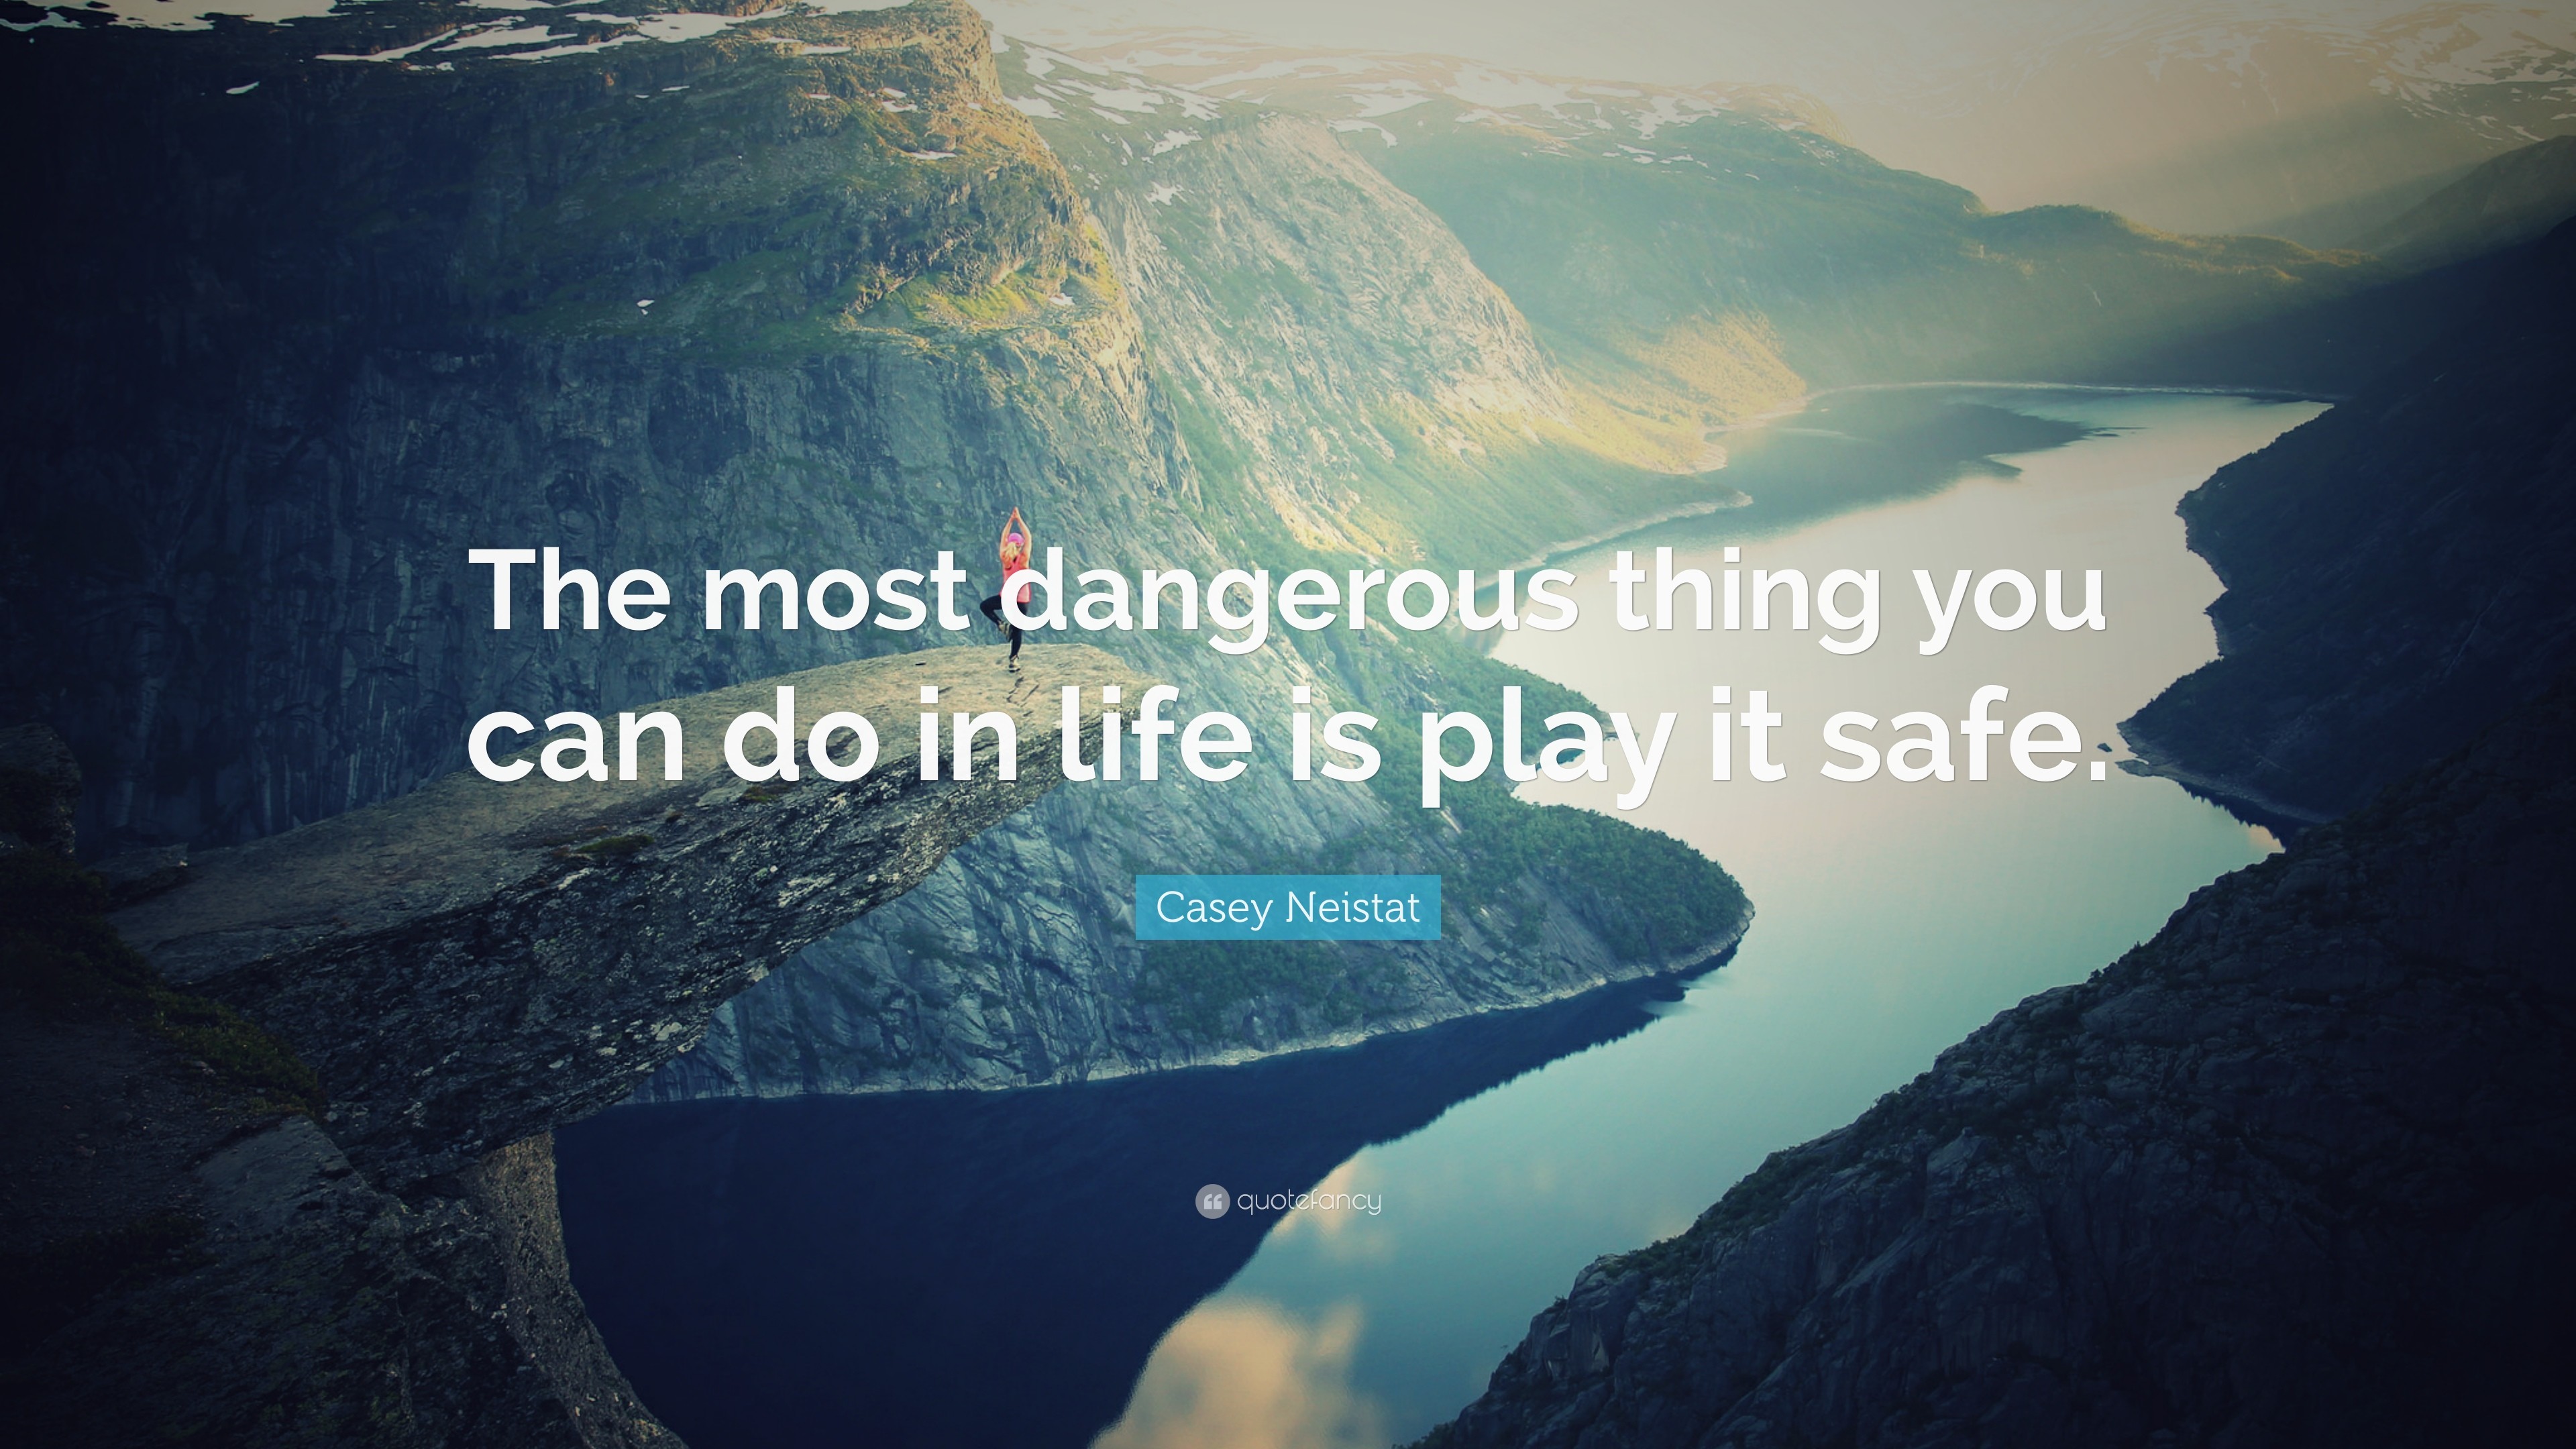 3840x2160 Casey Neistat Quote: “The most dangerous thing you can do in life is play